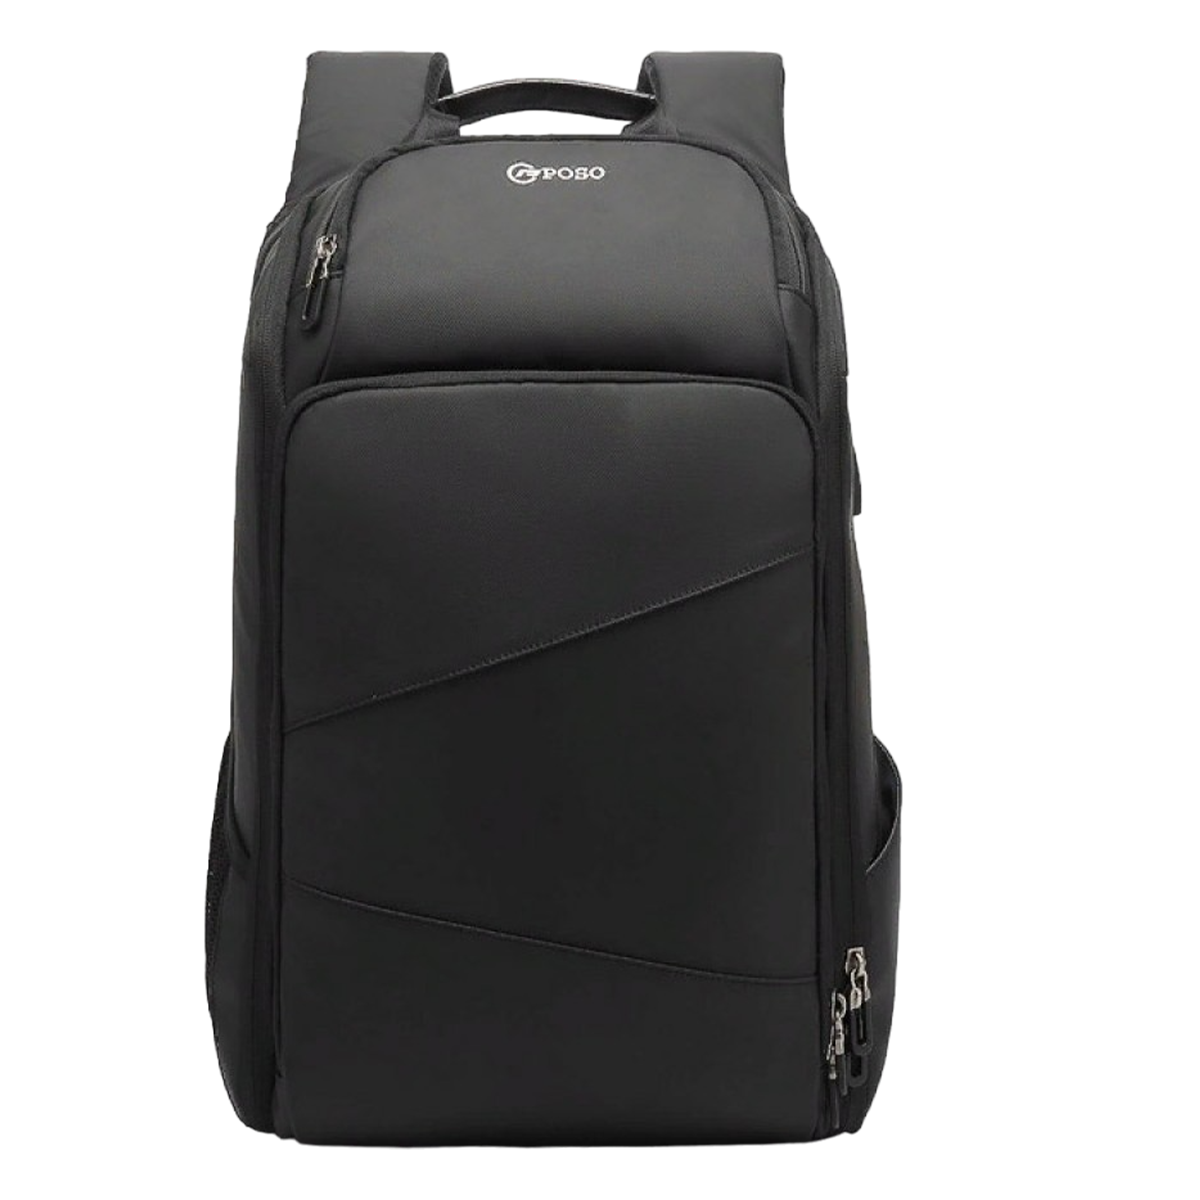 Expedition-X Backpack